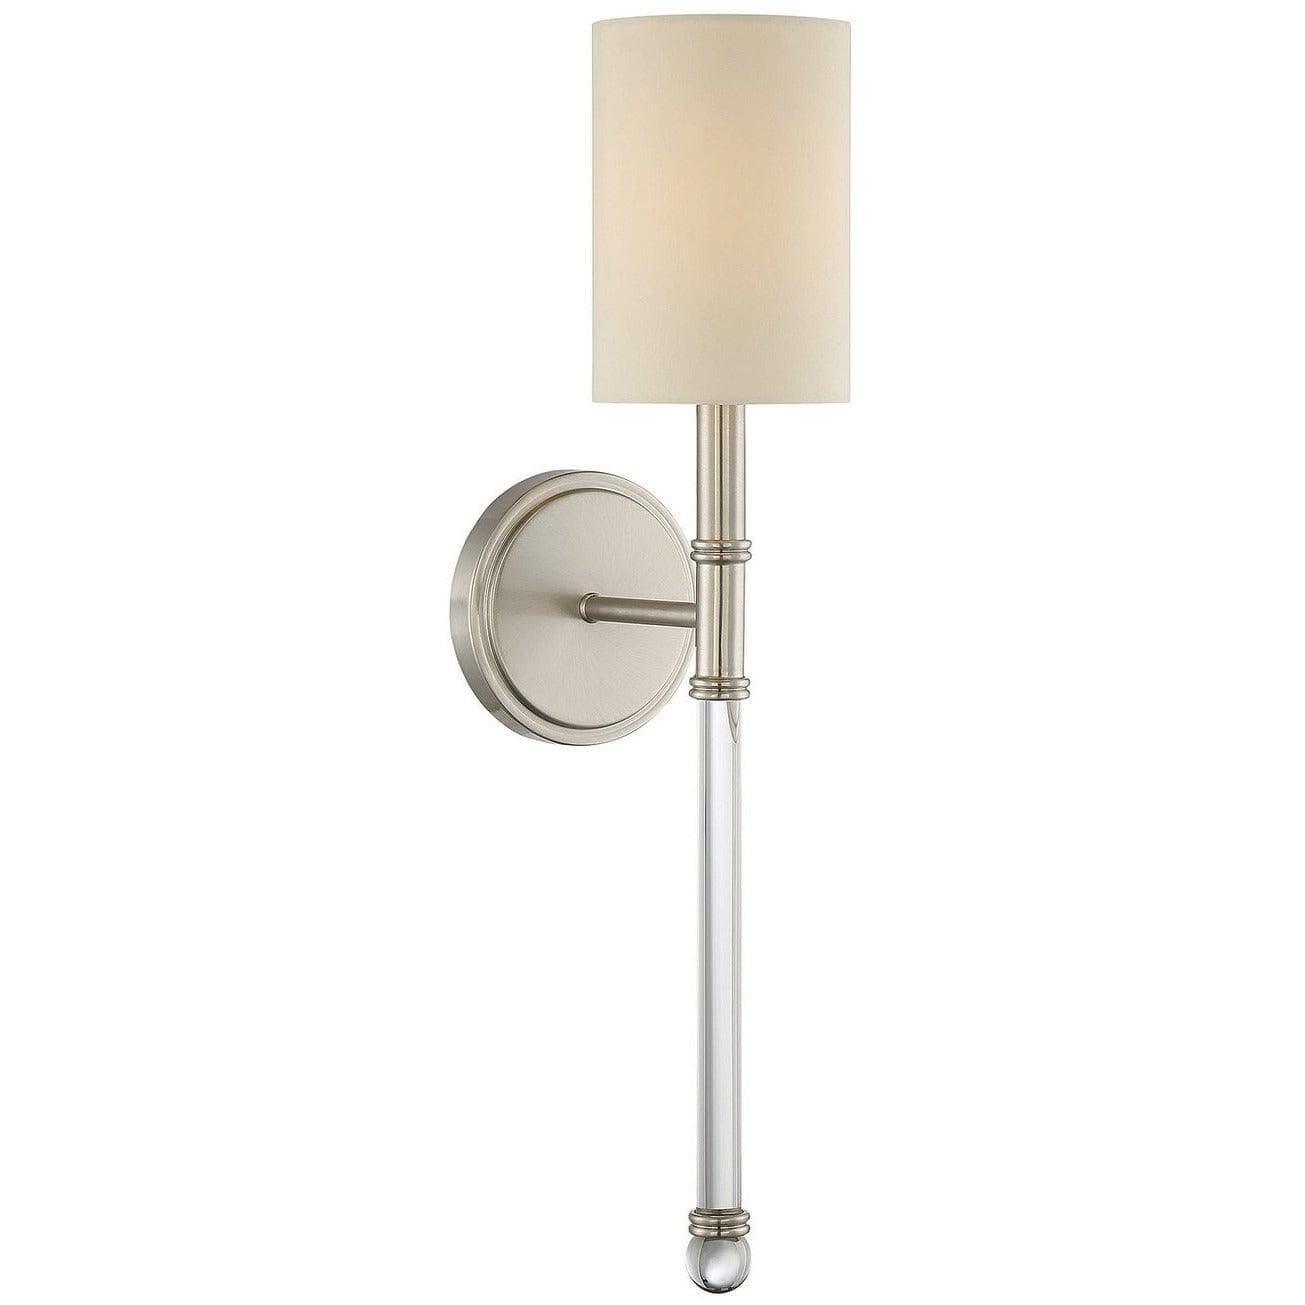 Montreal Lighting & Hardware - Fremont One Light Wall Sconce by Savoy House | Open Box - 9-101-1-SN-OB | Montreal Lighting & Hardware